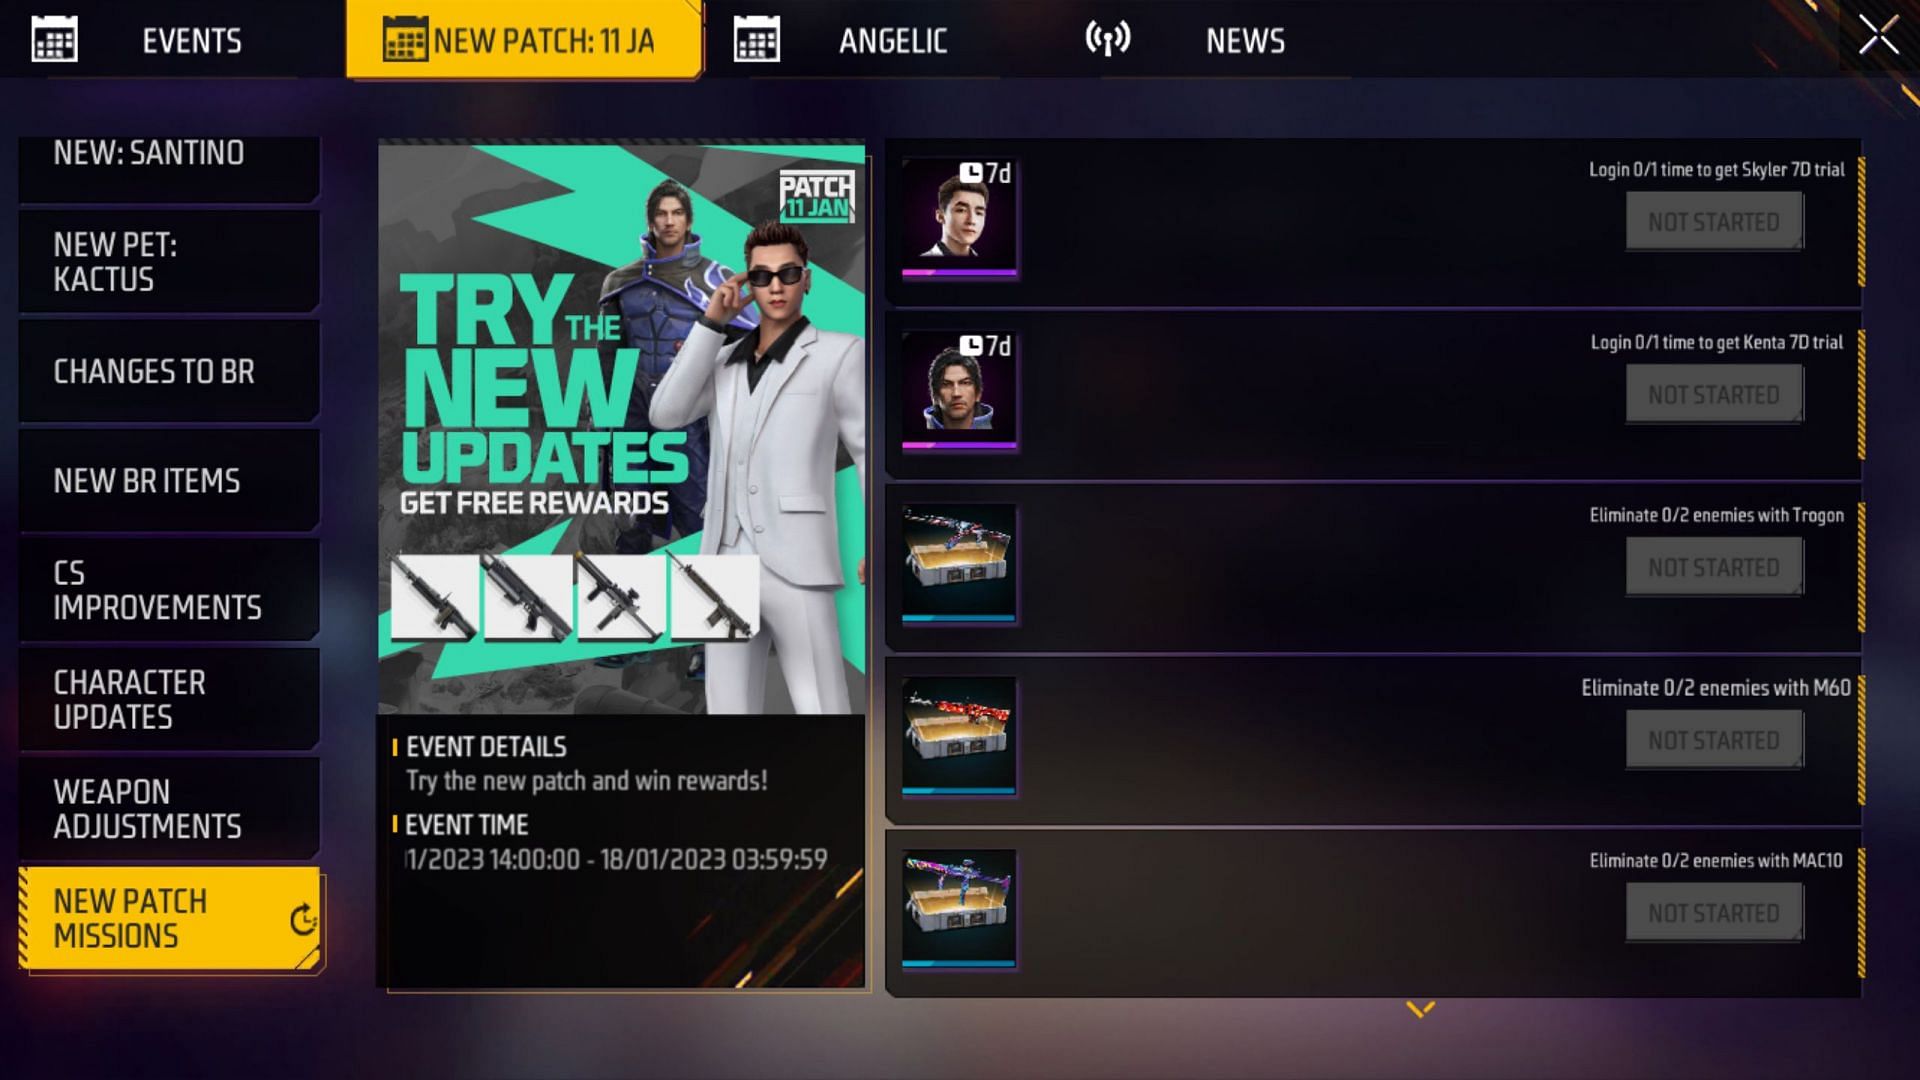 New rewards will be available as part of the New Patch Missions in Free Fire MAX (Image via Garena)